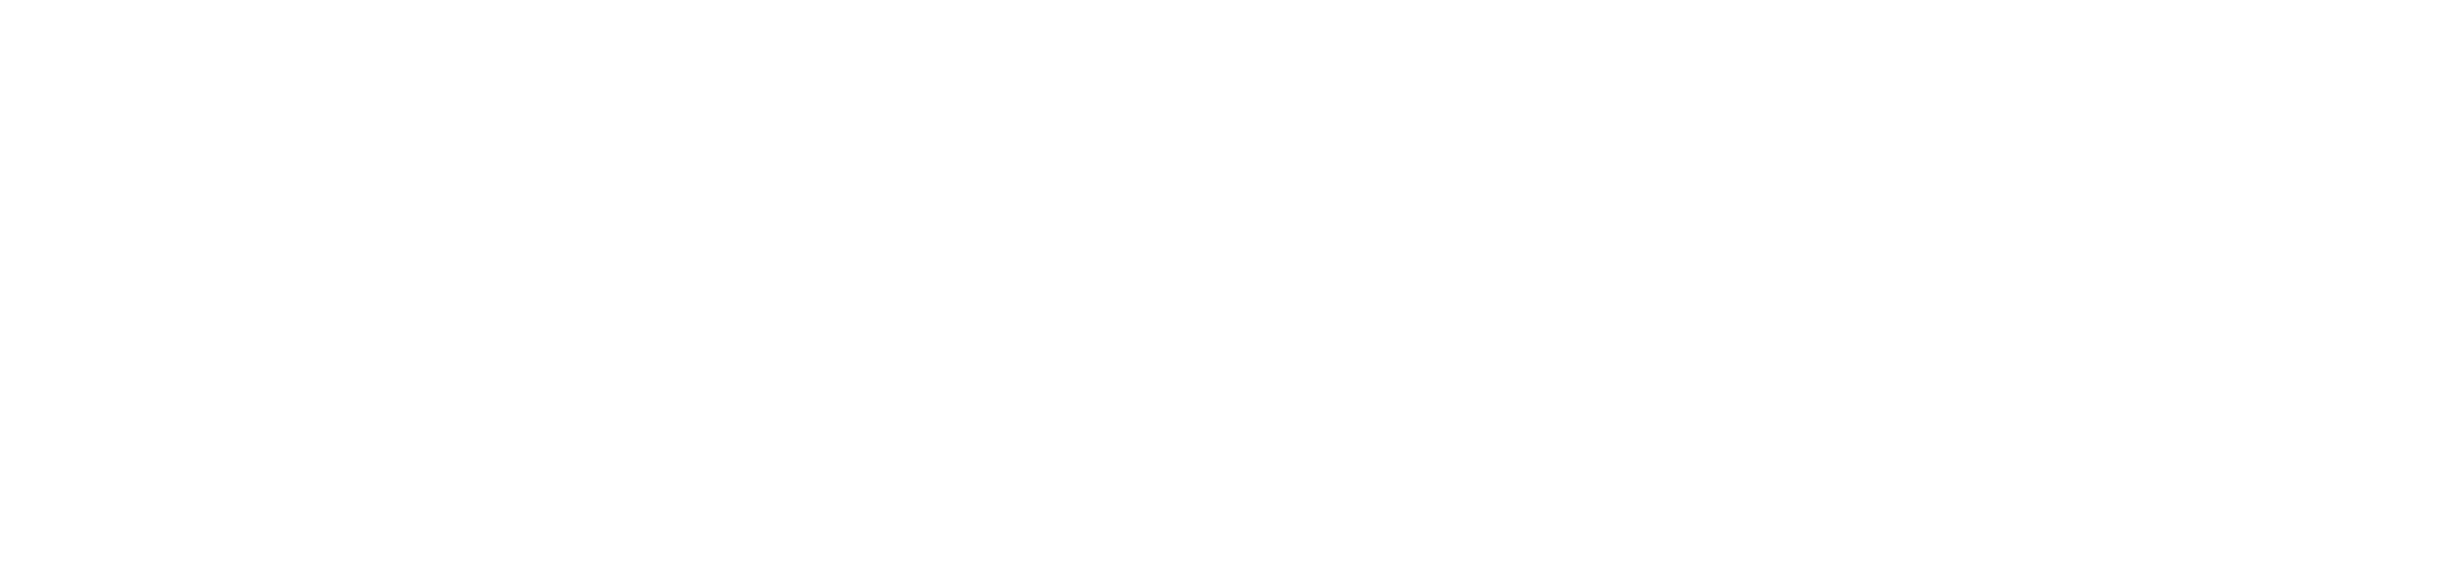 Well-Being Index - Logo